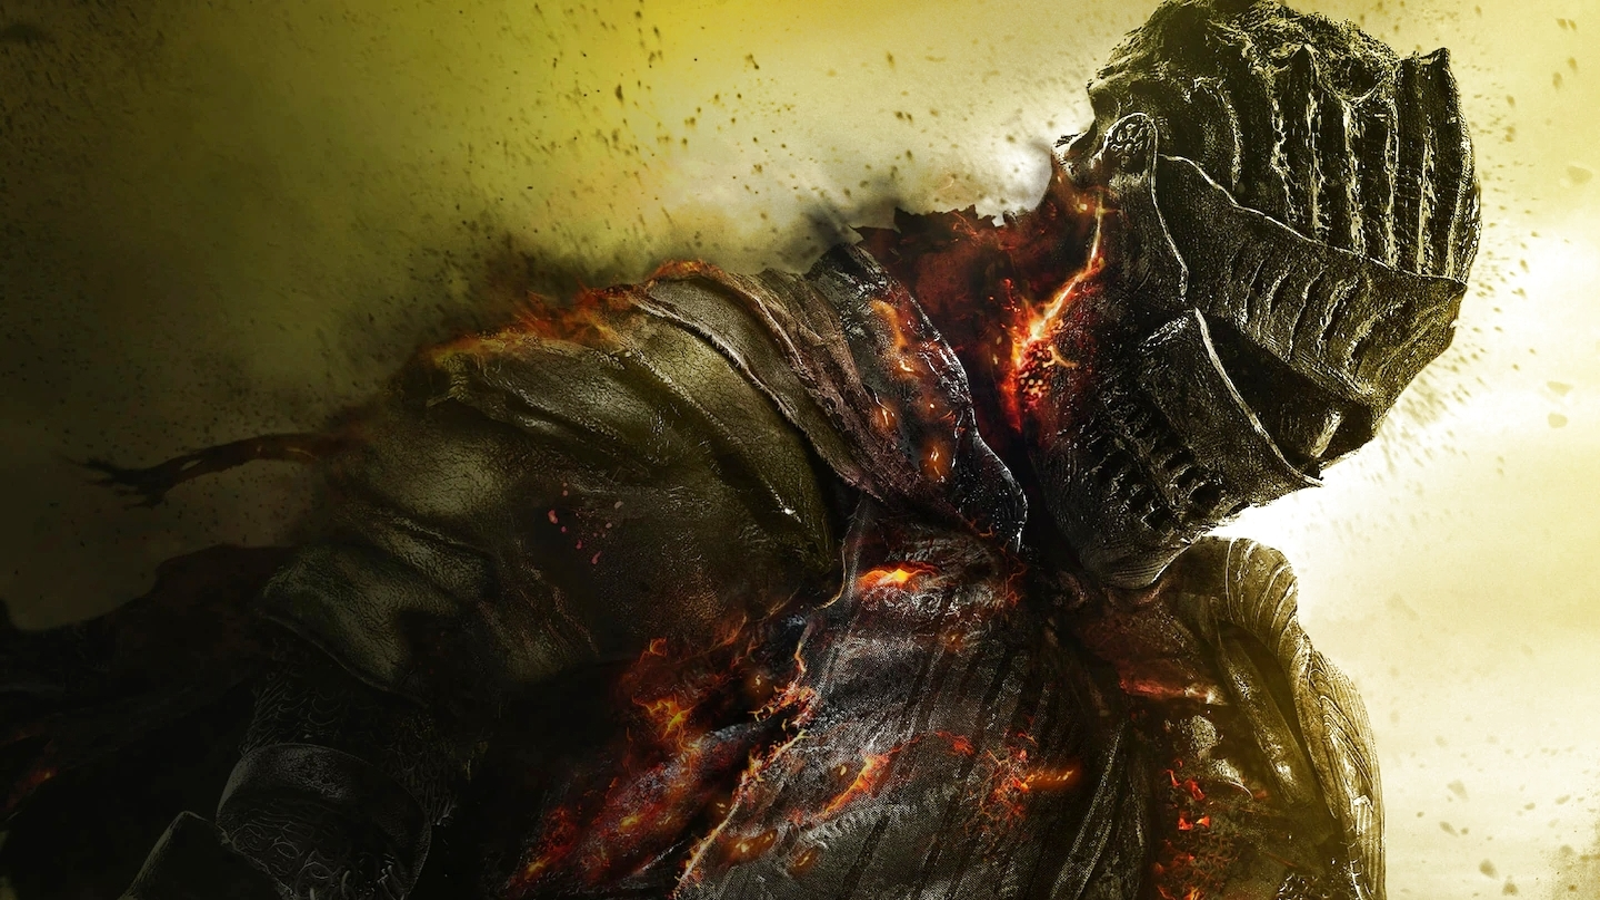 Dark Souls 3 now runs at 60fps on Xbox Series X/S thanks to FPS Boost